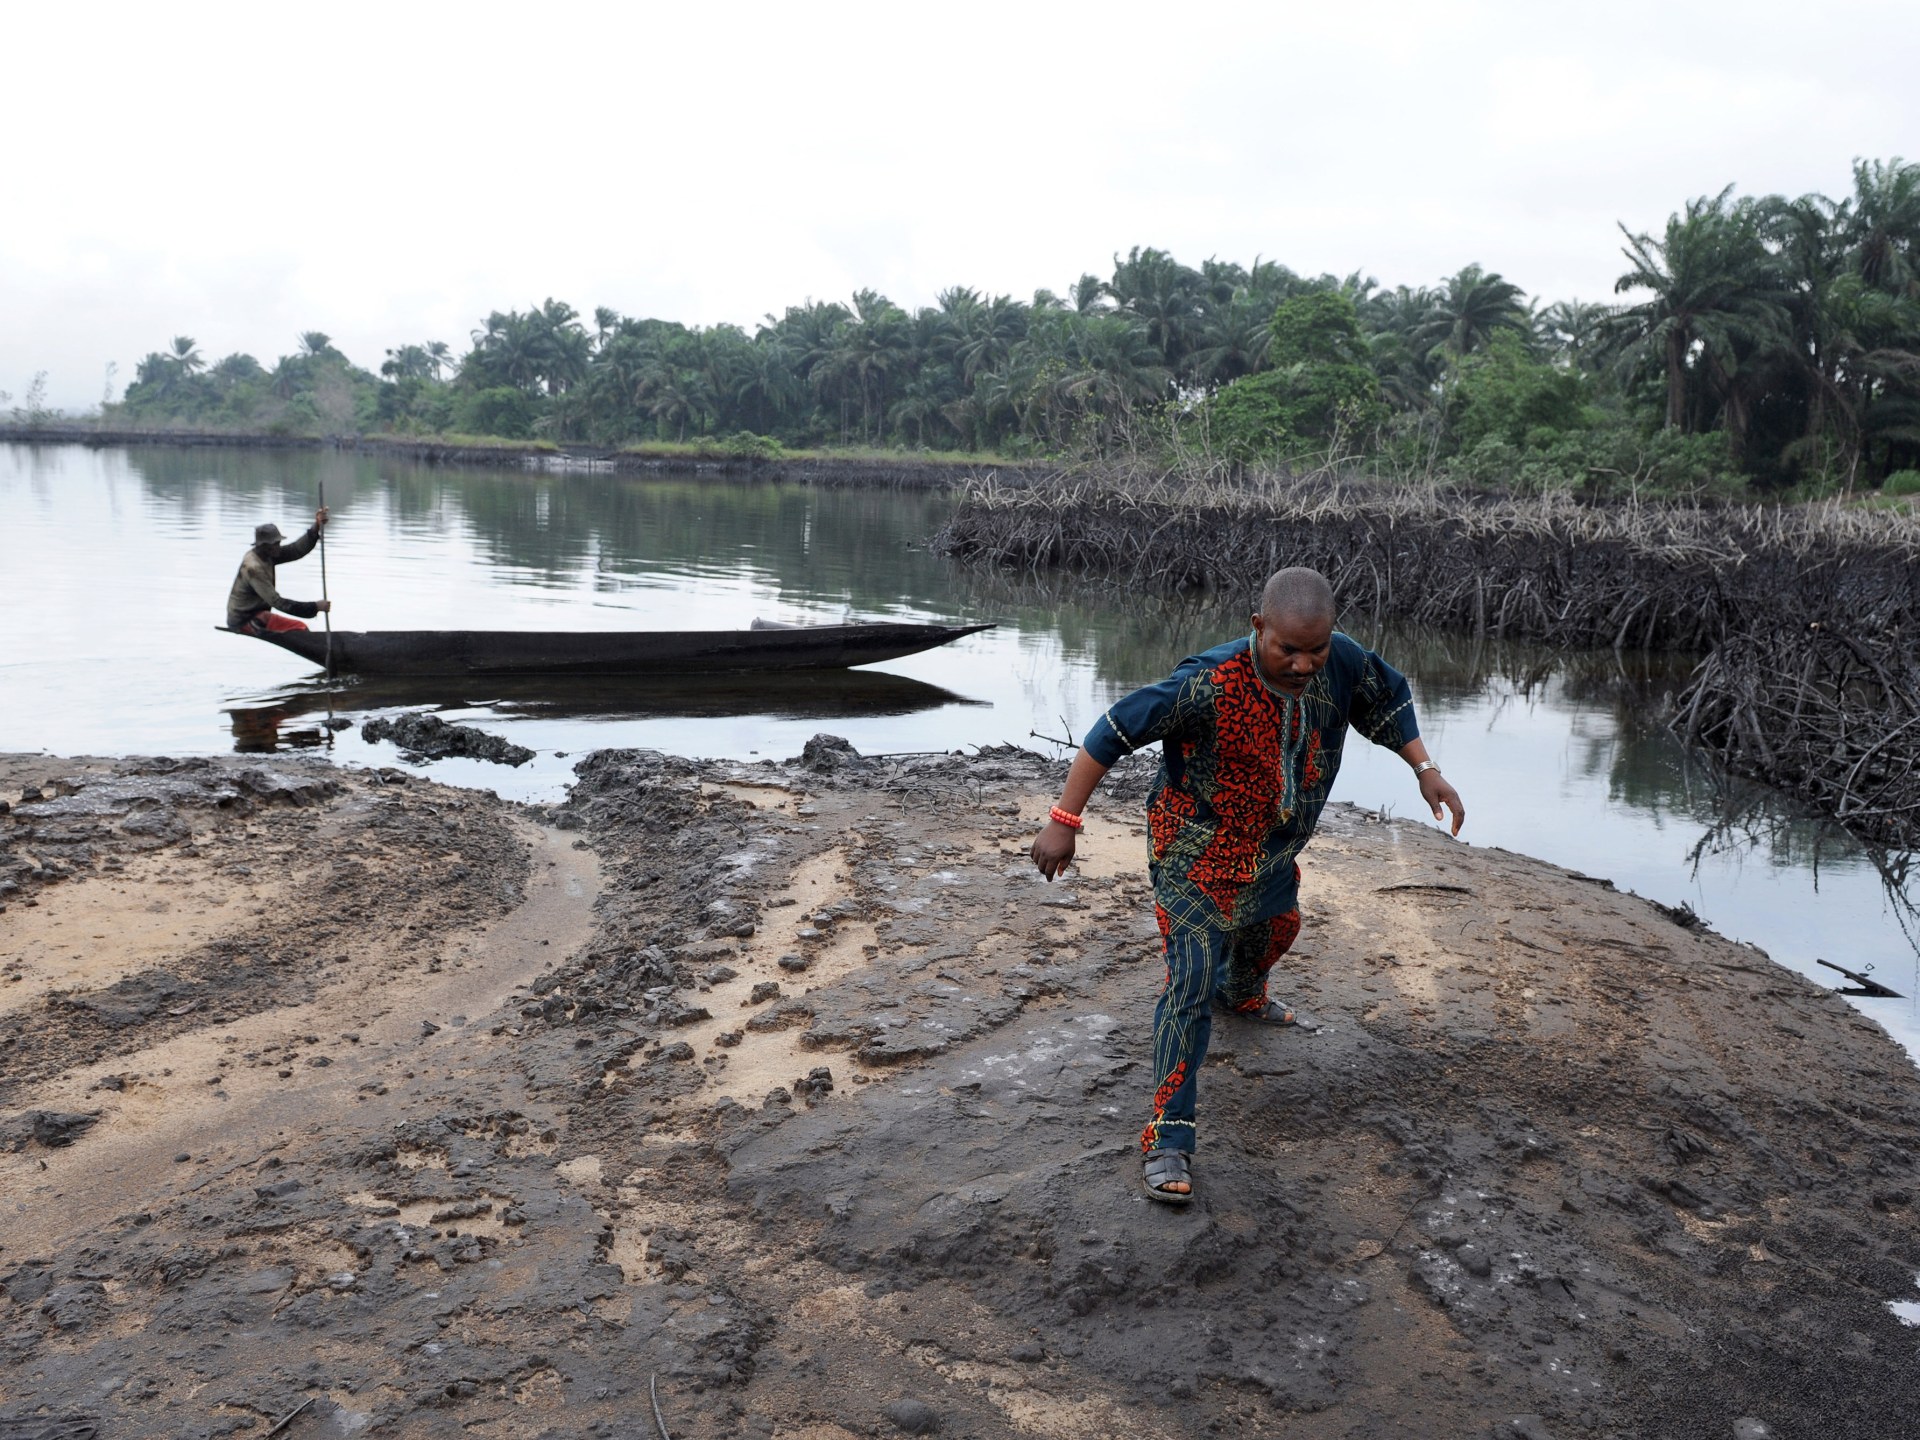 Nigerian communities file damages claim against Shell in UK court